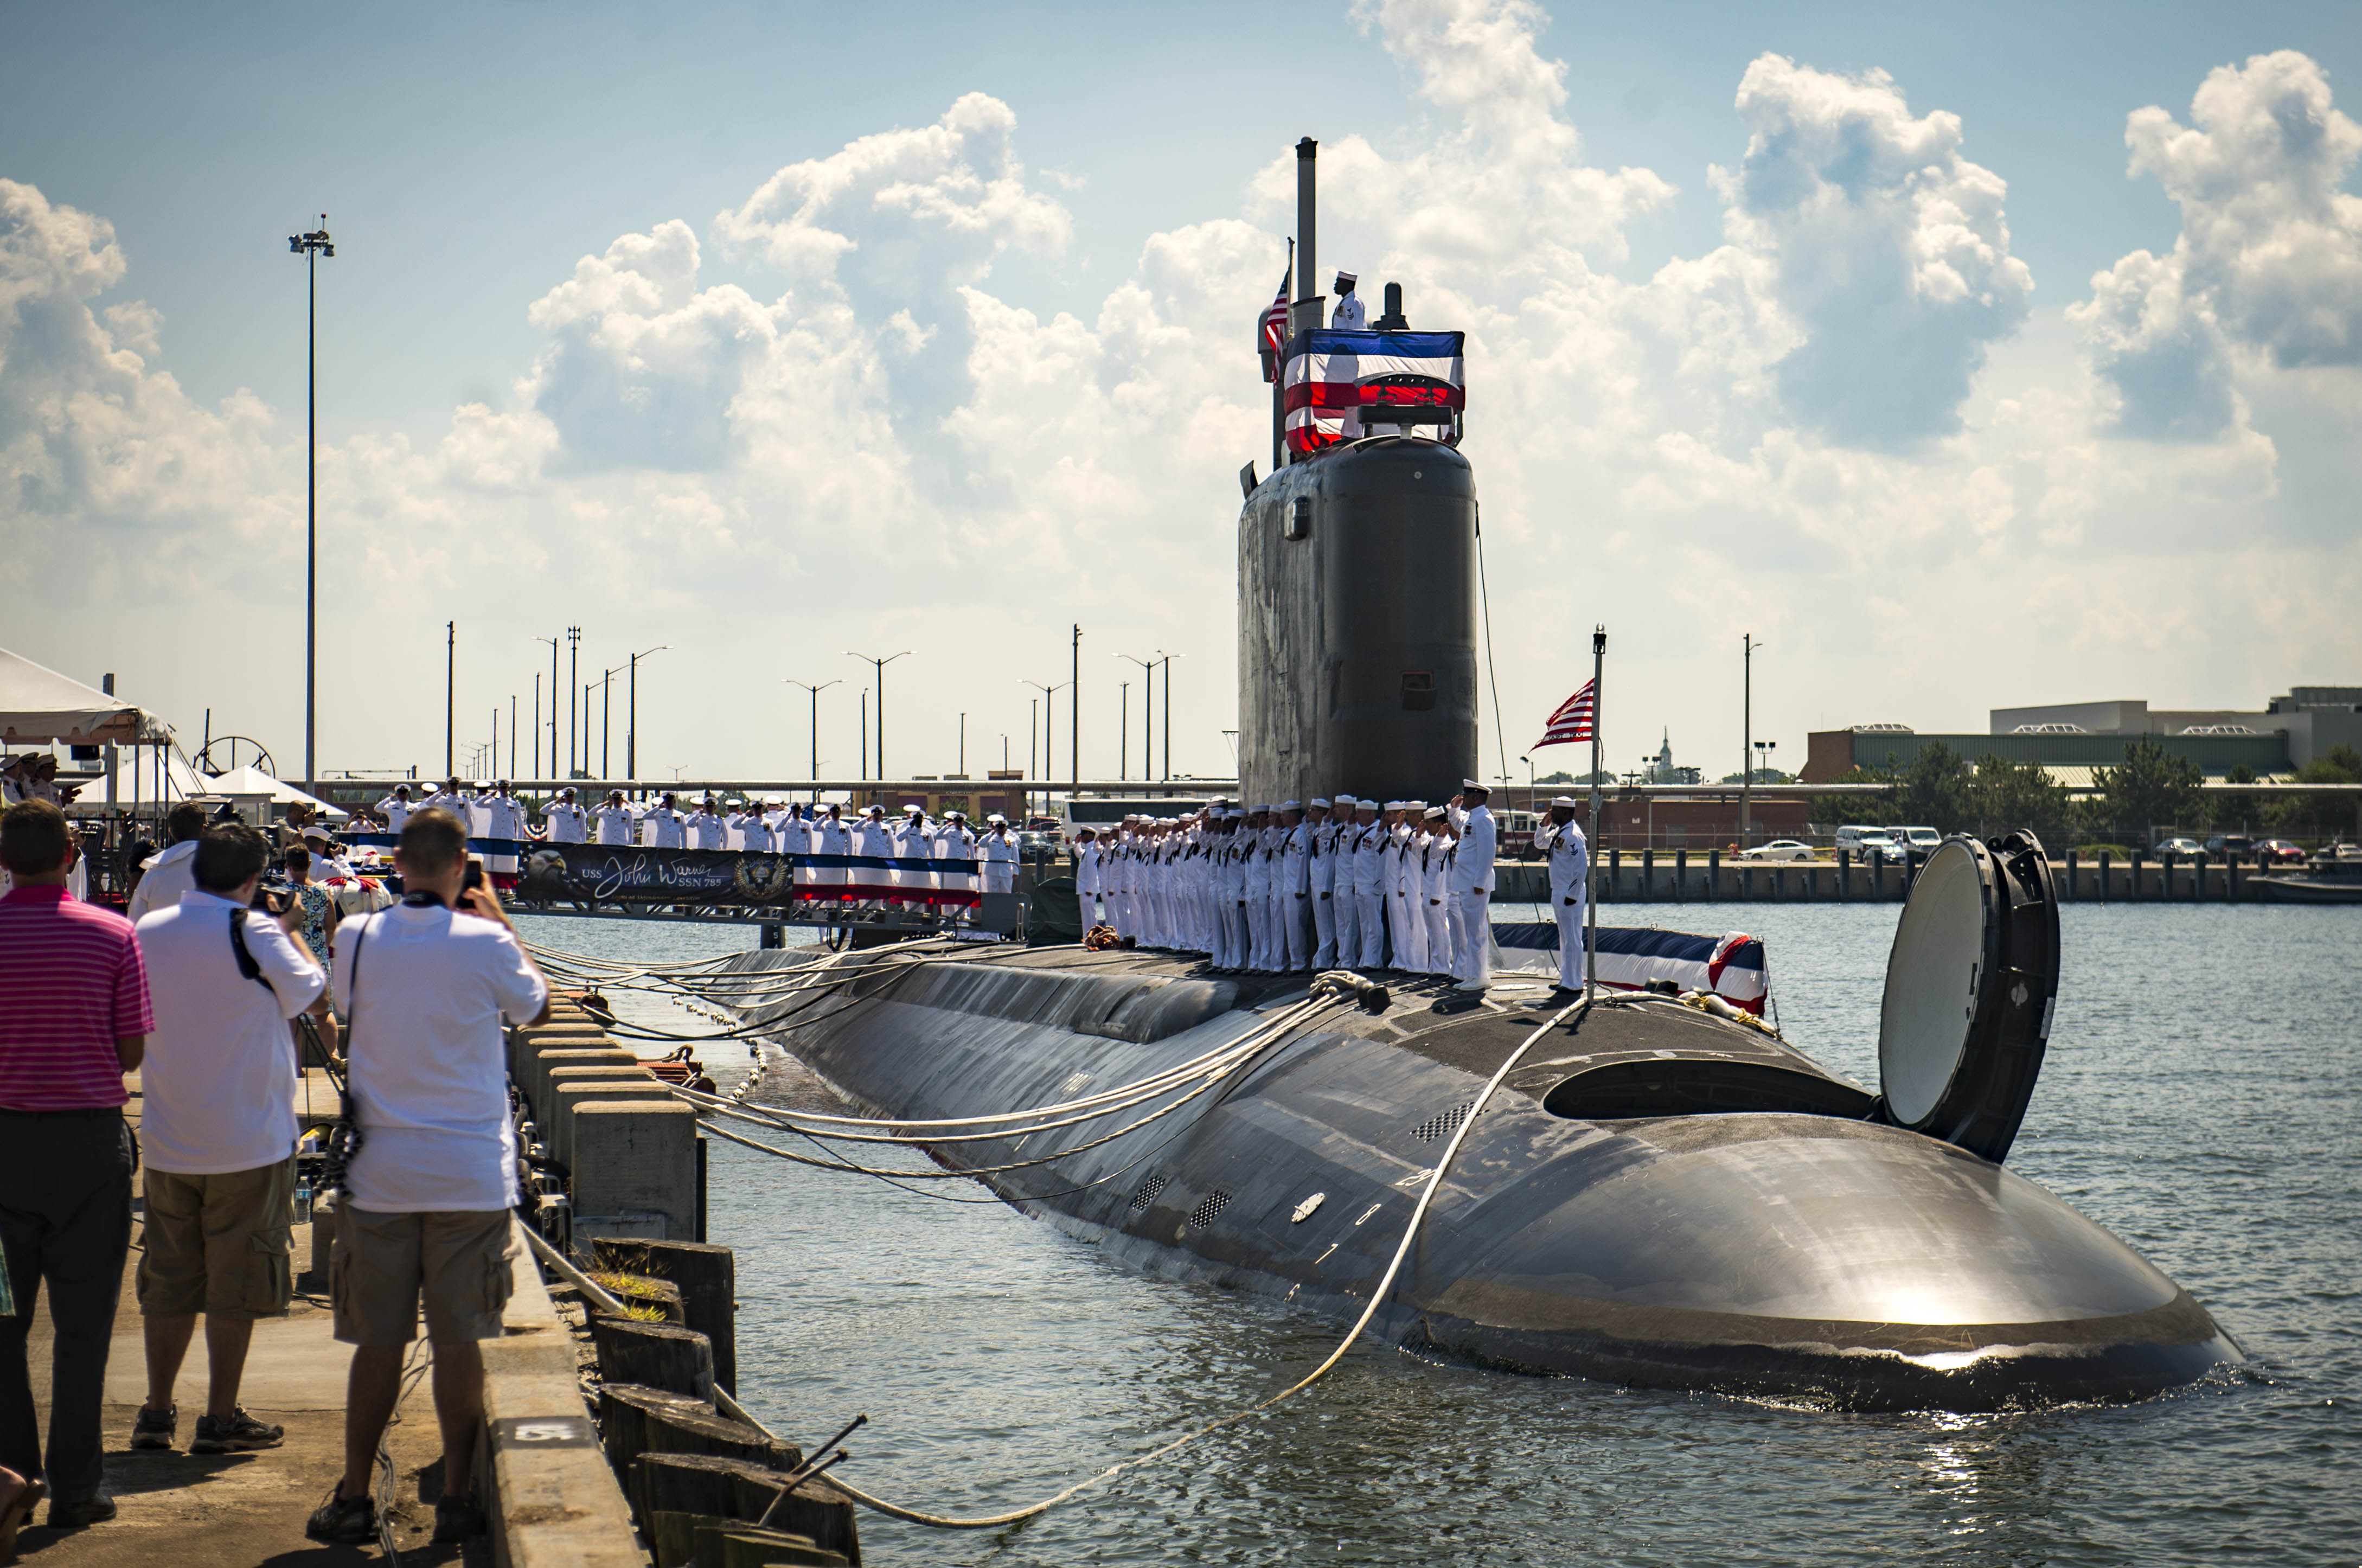 Sailors man the rails as they bring the ship to life during the commissioning ceremony for the Virginia-class attack submarine USS John Warner (SSN-785) at Naval Station Norfolk on Aug. 1, 2015. US Navy photo.